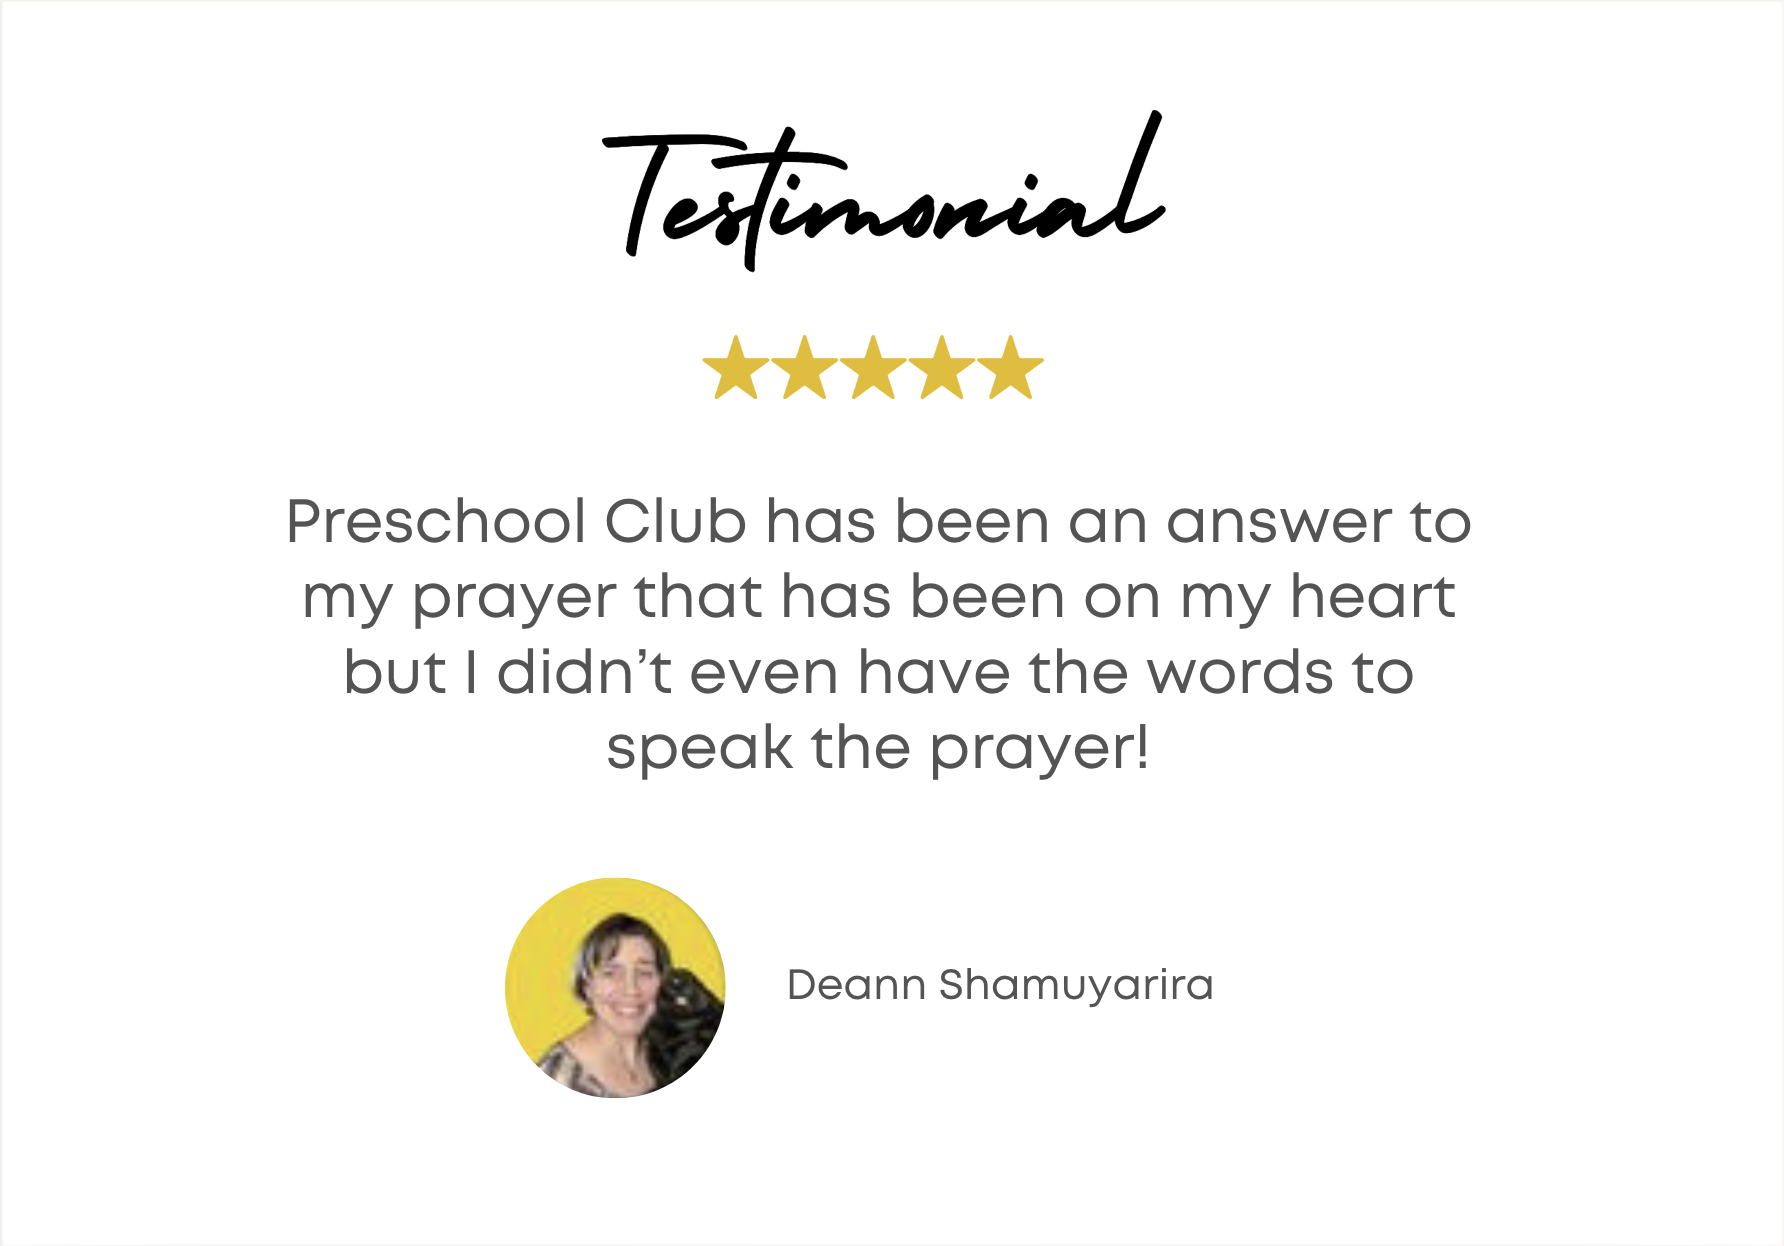 Testimonial - Preschool Club has been an answer to my prayer that has been on my heart but I didn't even have the words to speak the prayer! - Deann Shamuyarira